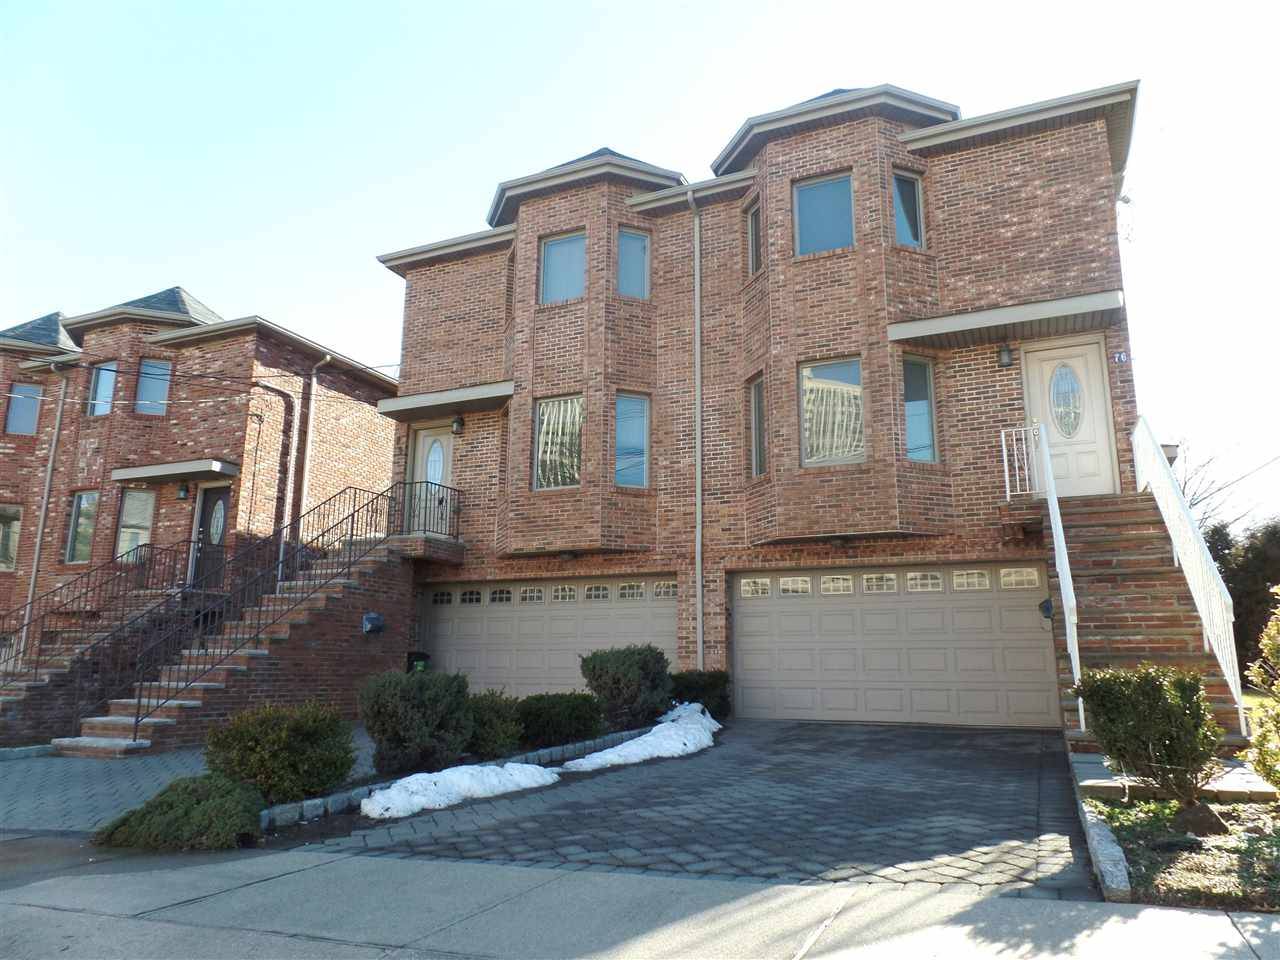 A beautiful brick duplex in the heart of desirable Cliffside Park